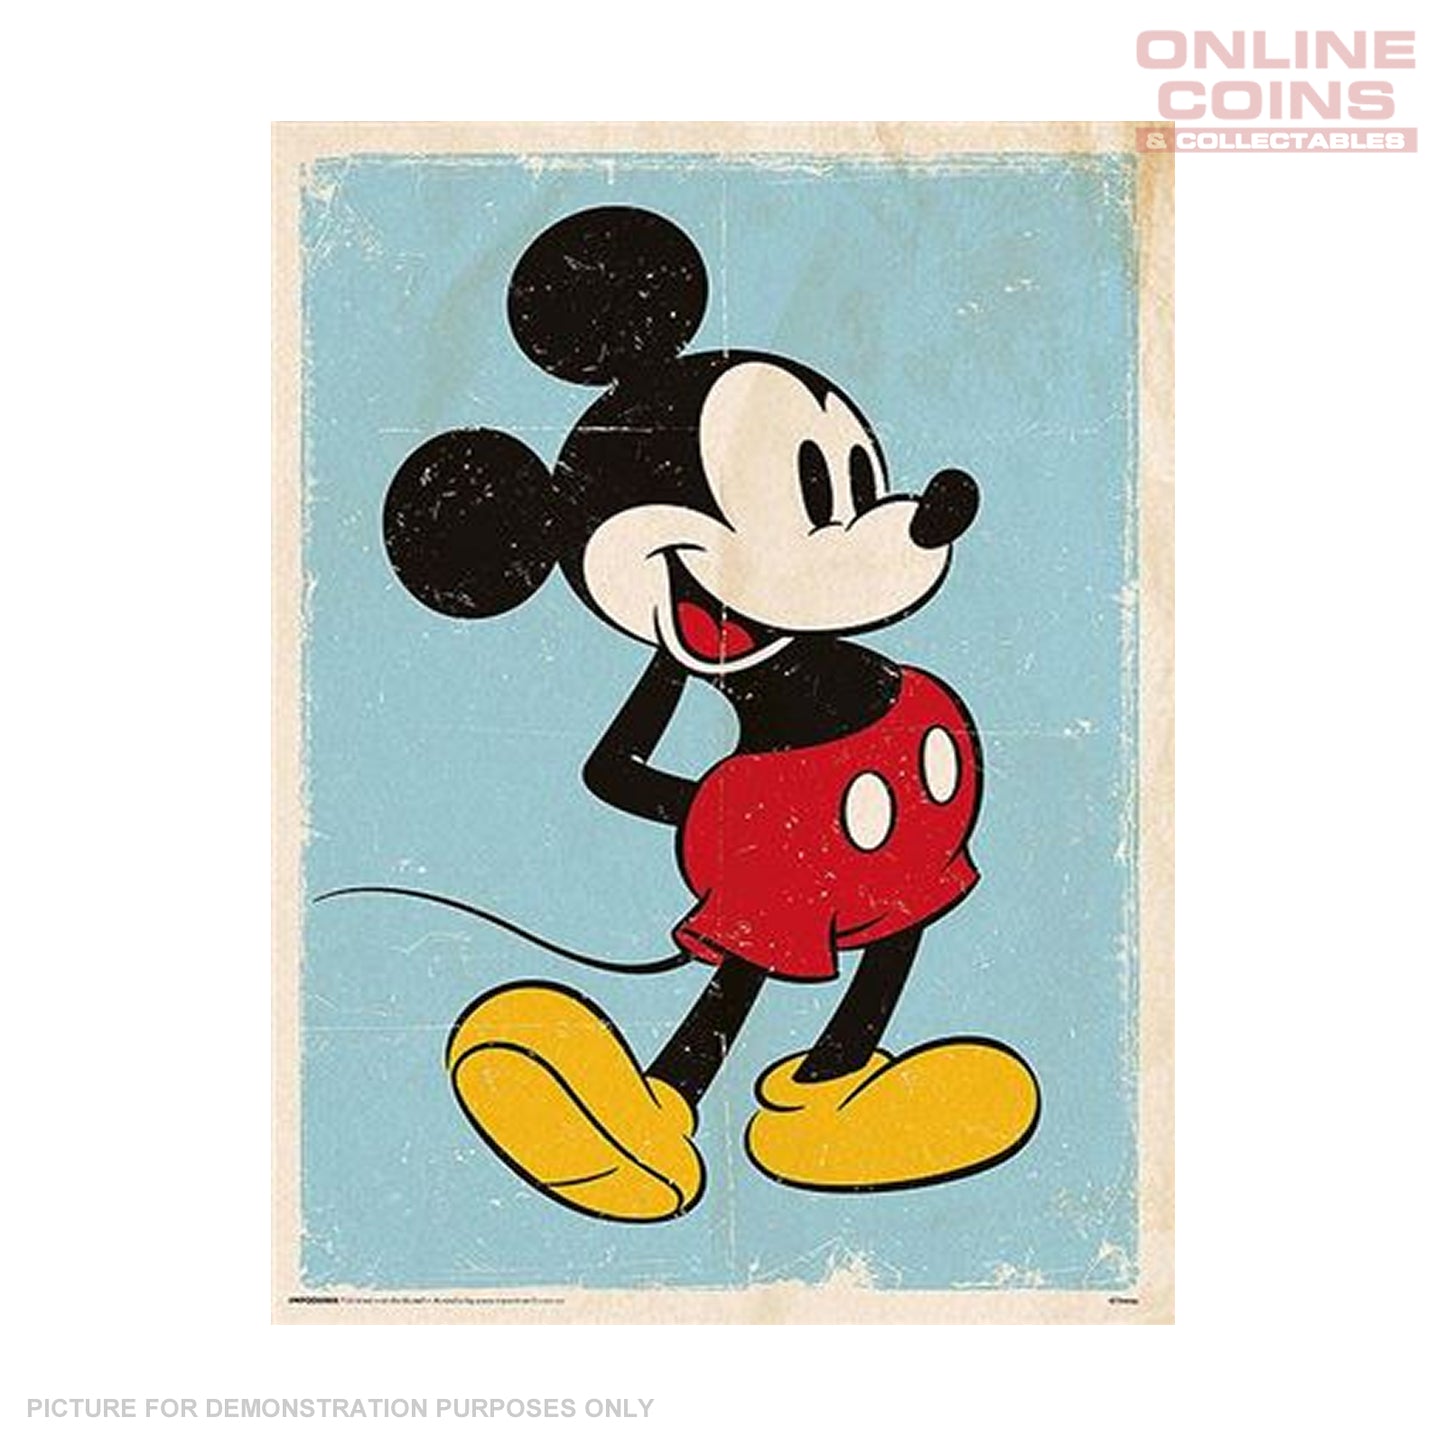 Disney Officially Licensed Art Print - Mickey Mouse Retro A3 Print